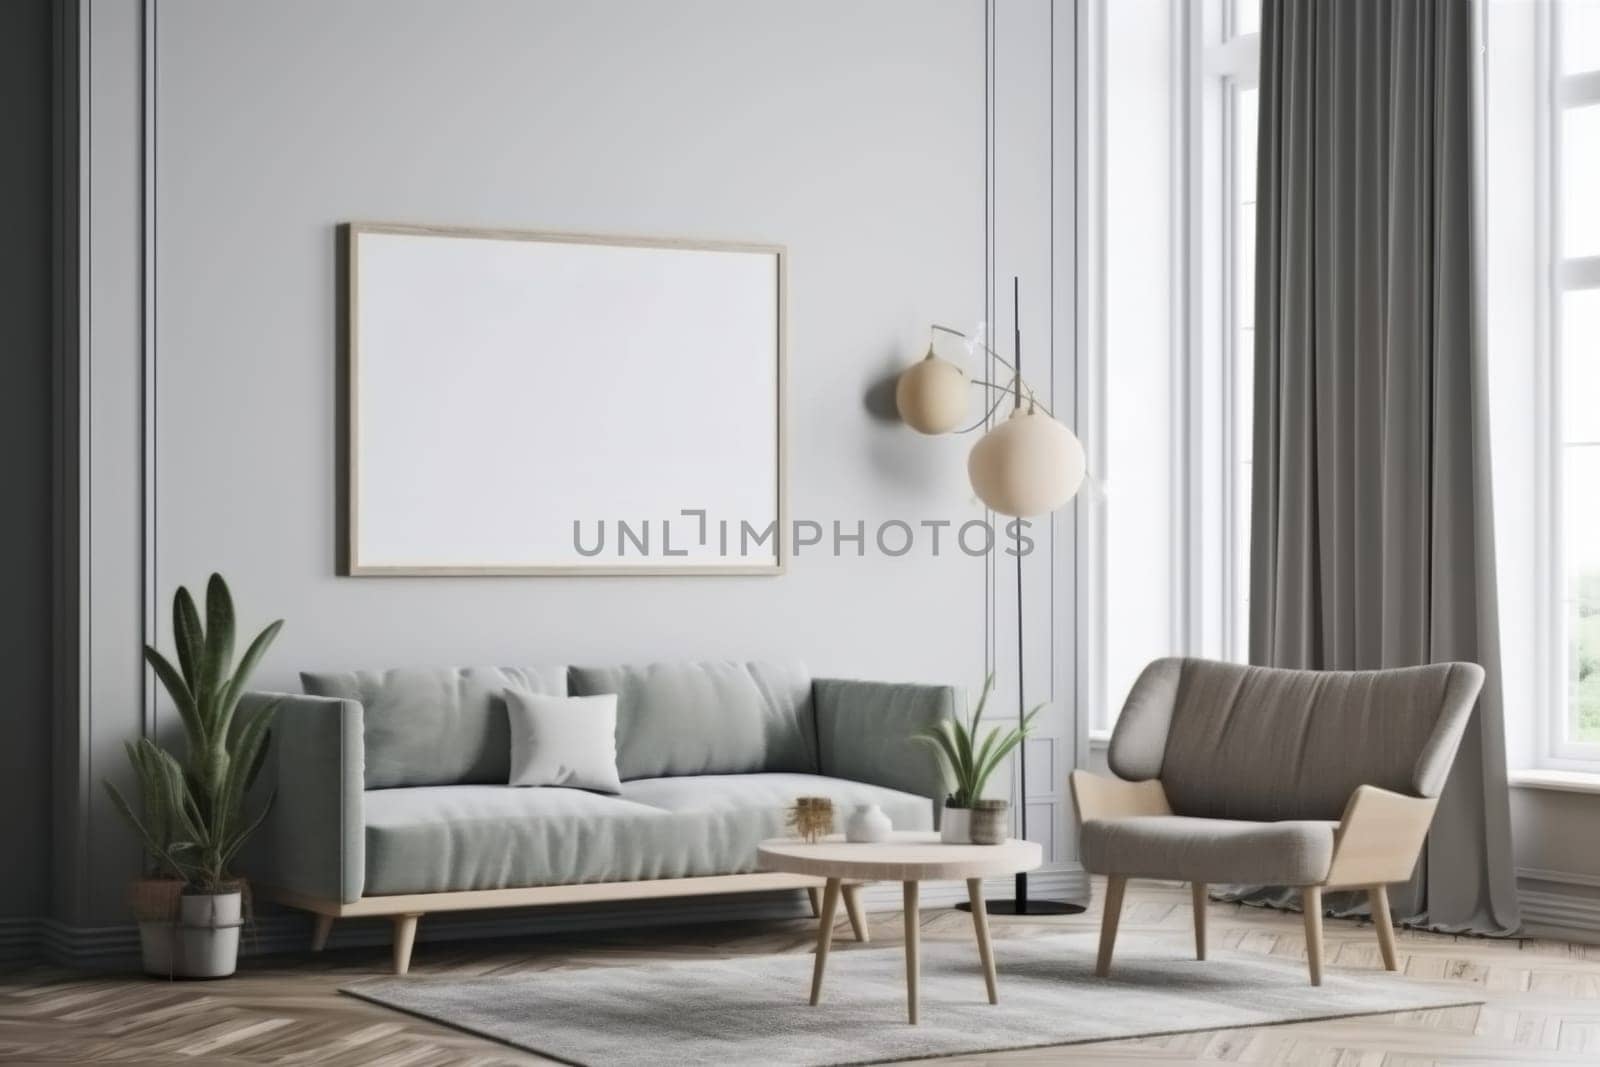 Scandinavian inspired interior space with a mock-up poster frame, natural textures, a cozy armchair, and a blend of modern and rustic decor